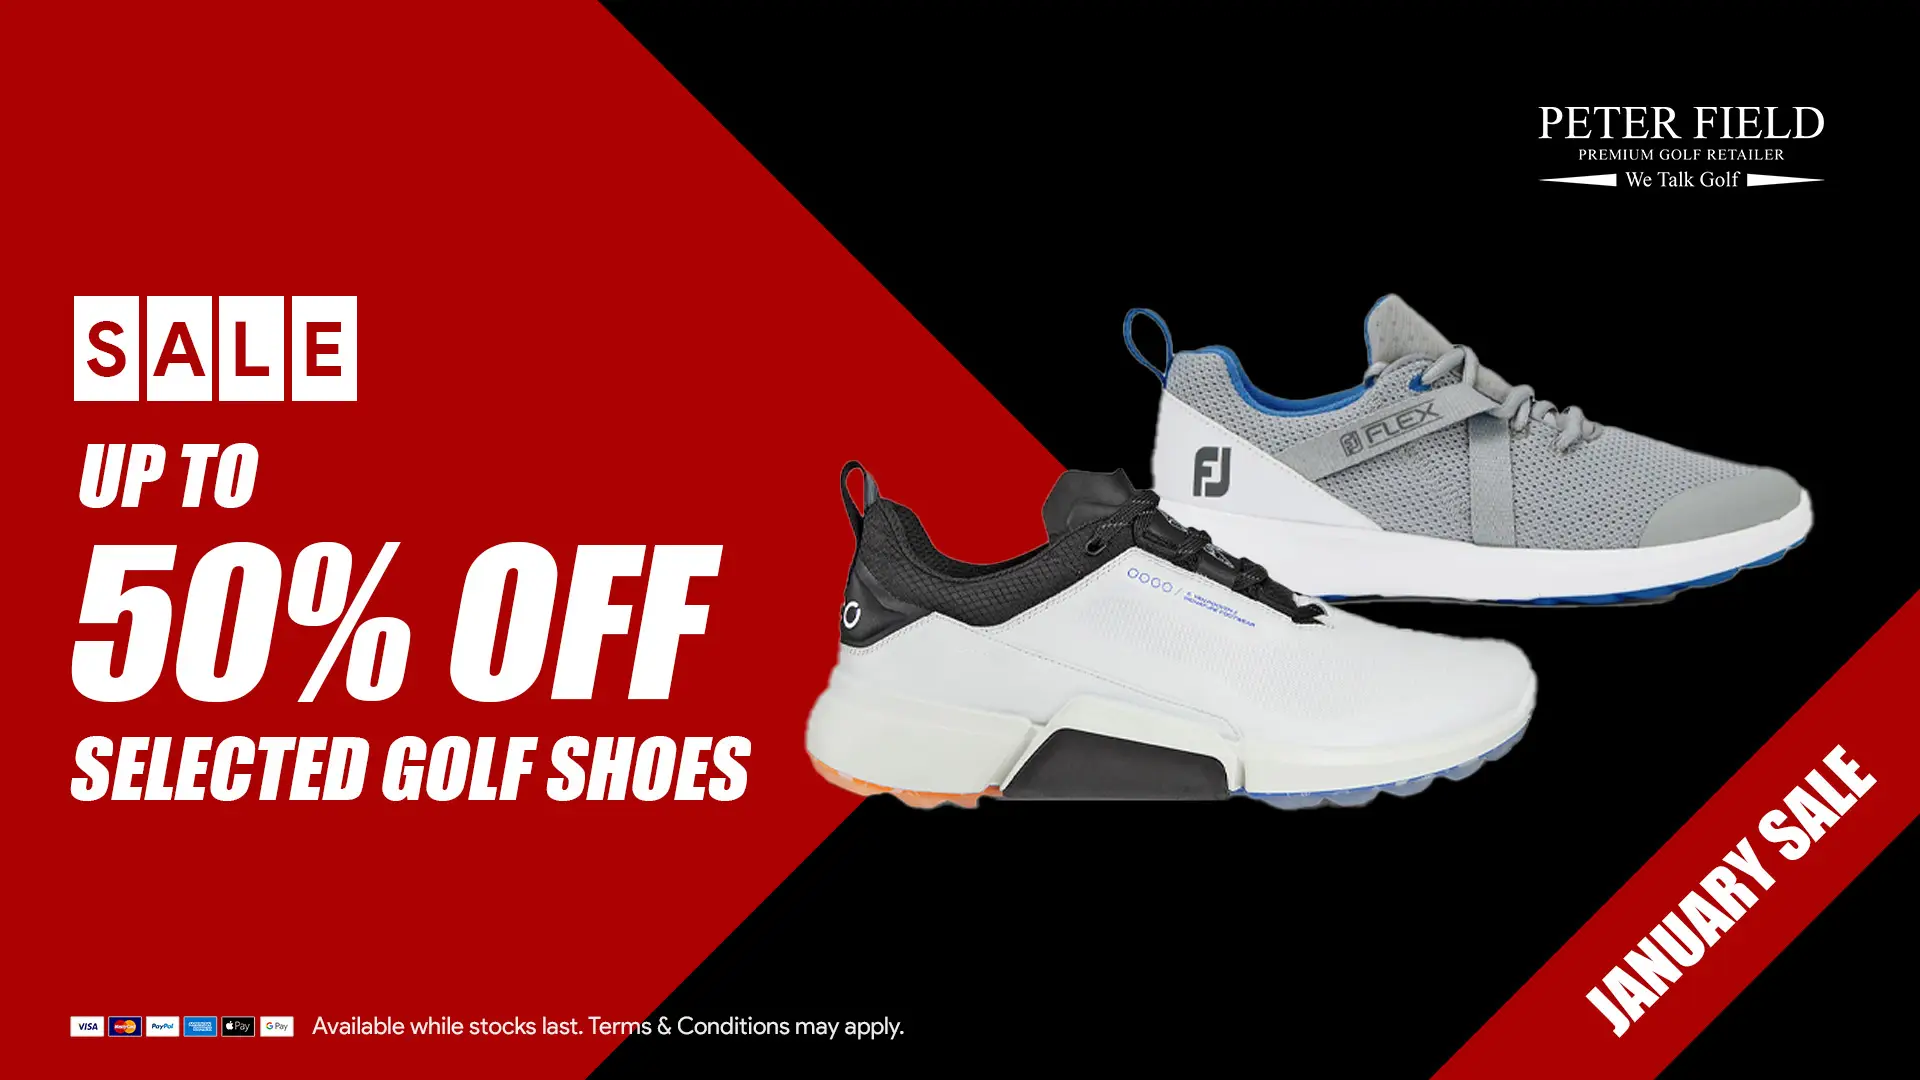 50% OFF SELECTED GOLF SHOES copy